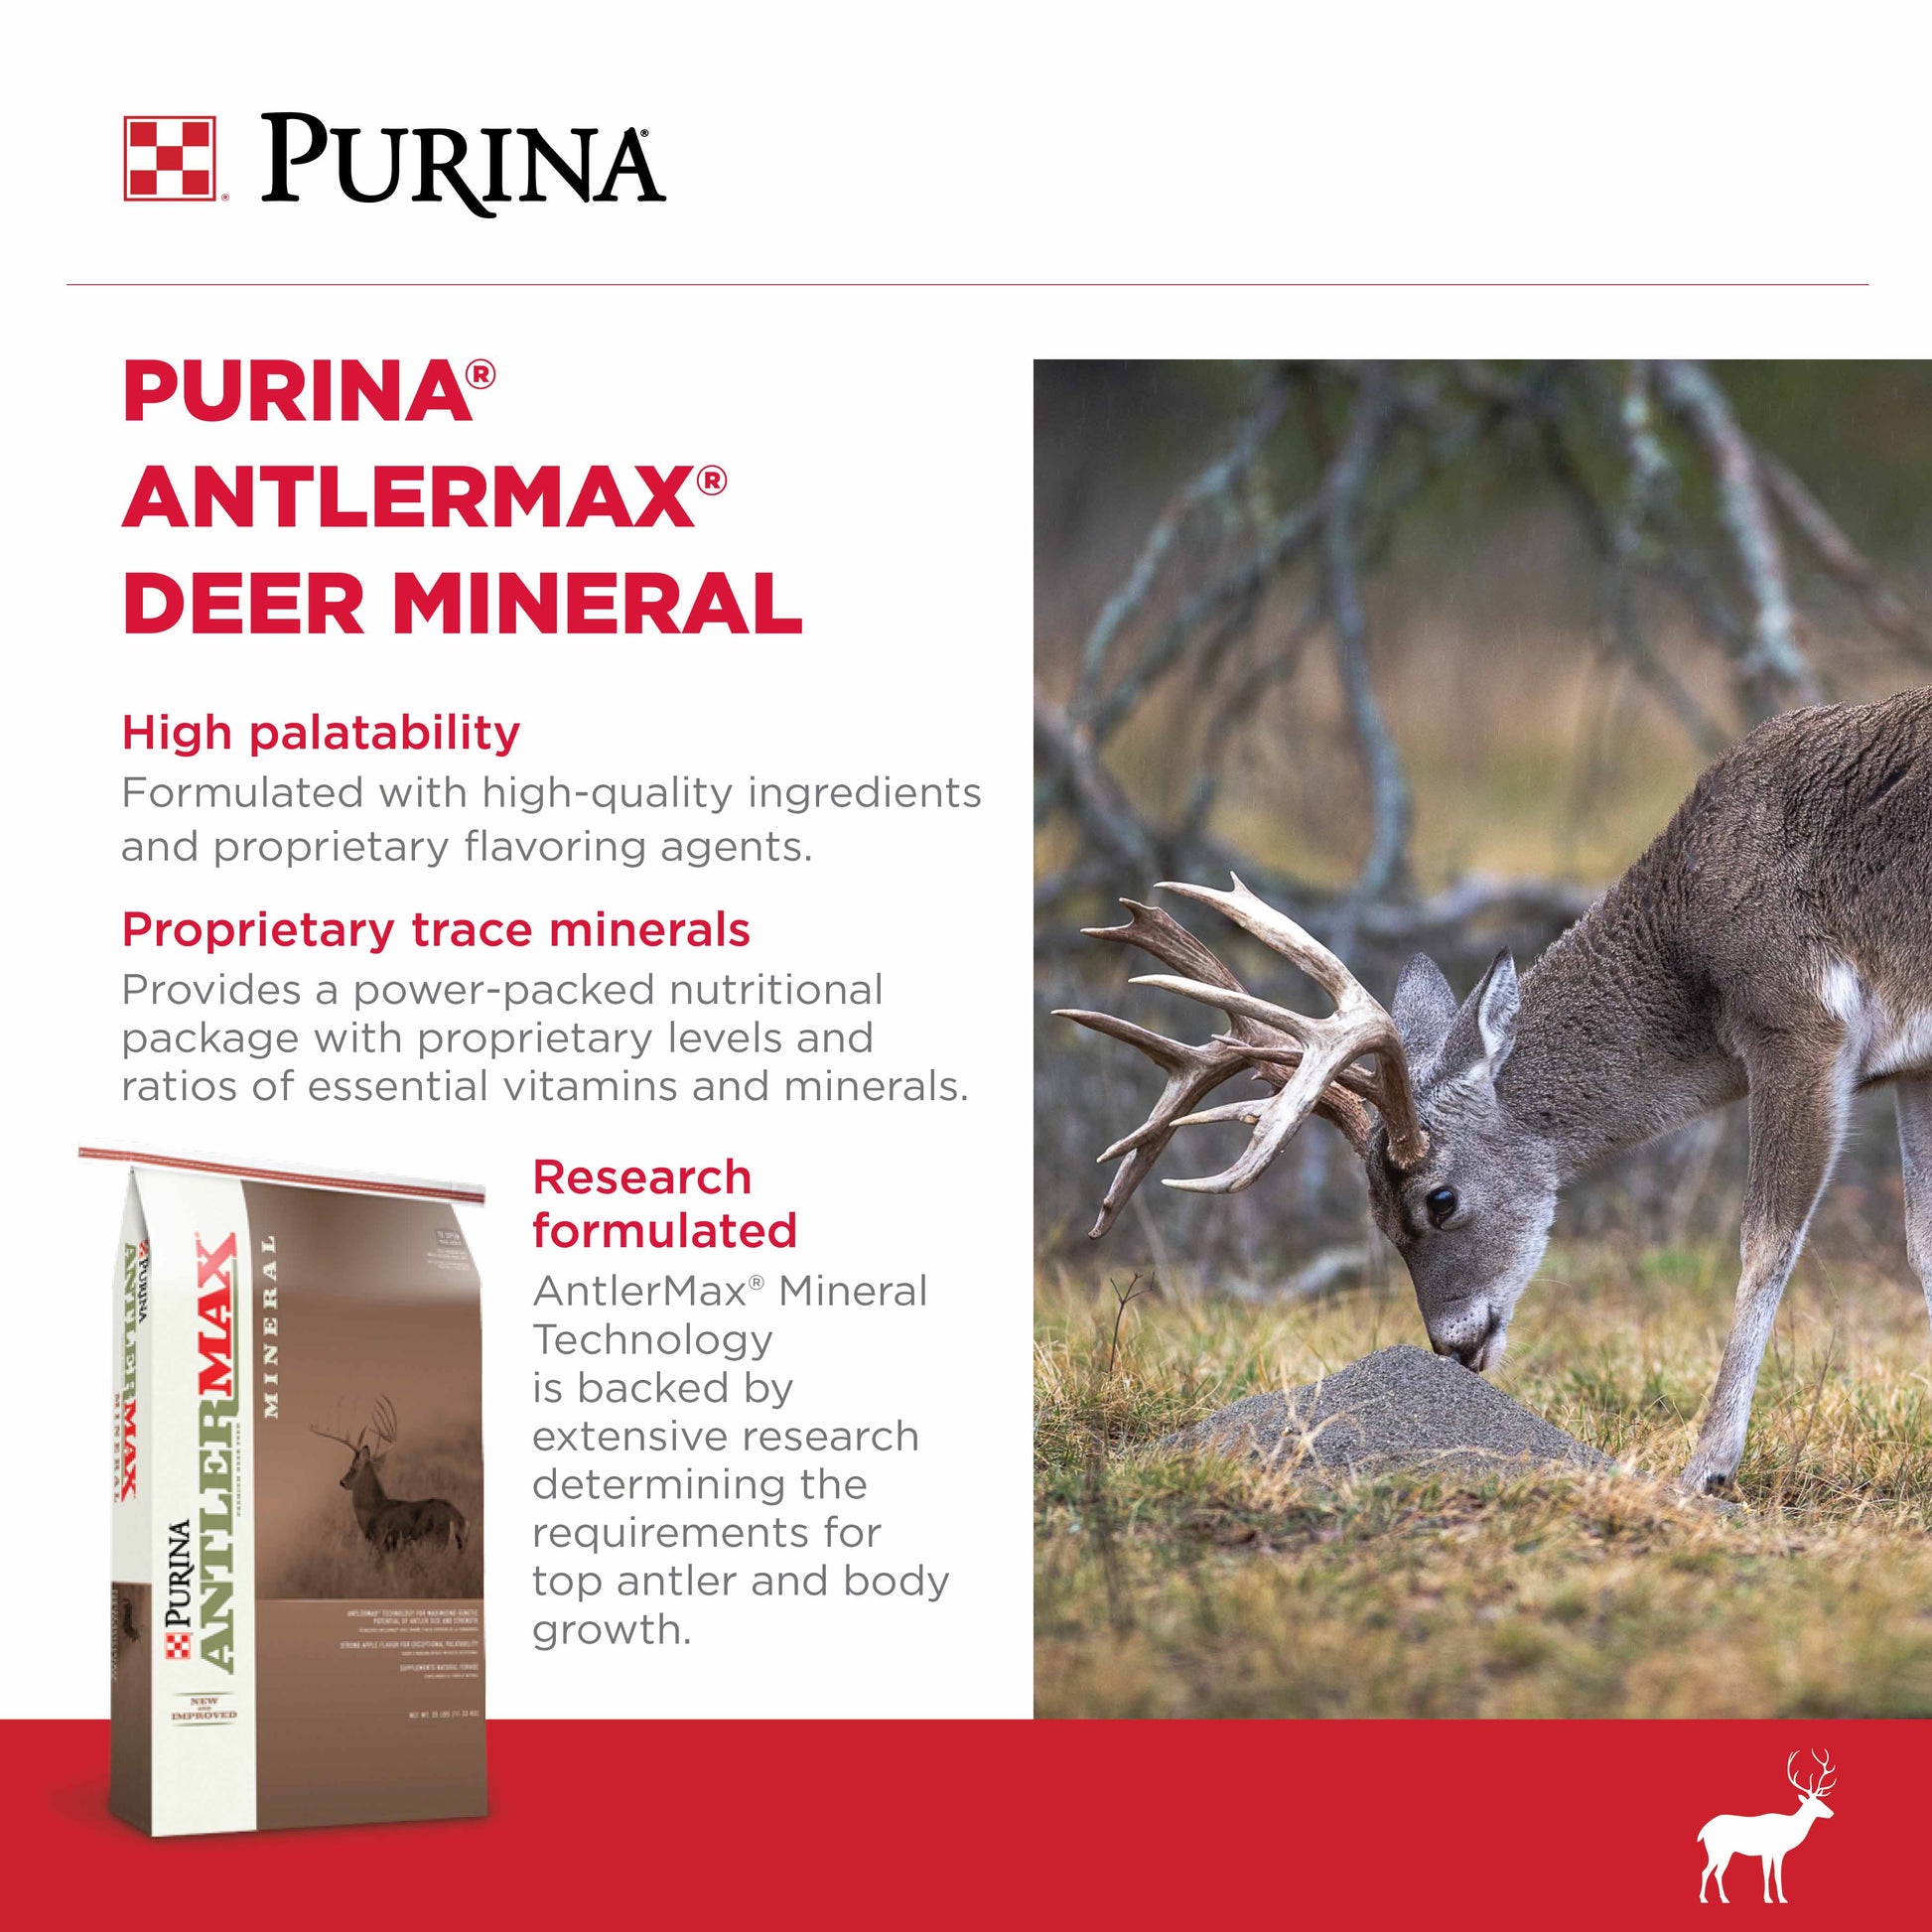 A deer eating Purina Mineral in a field